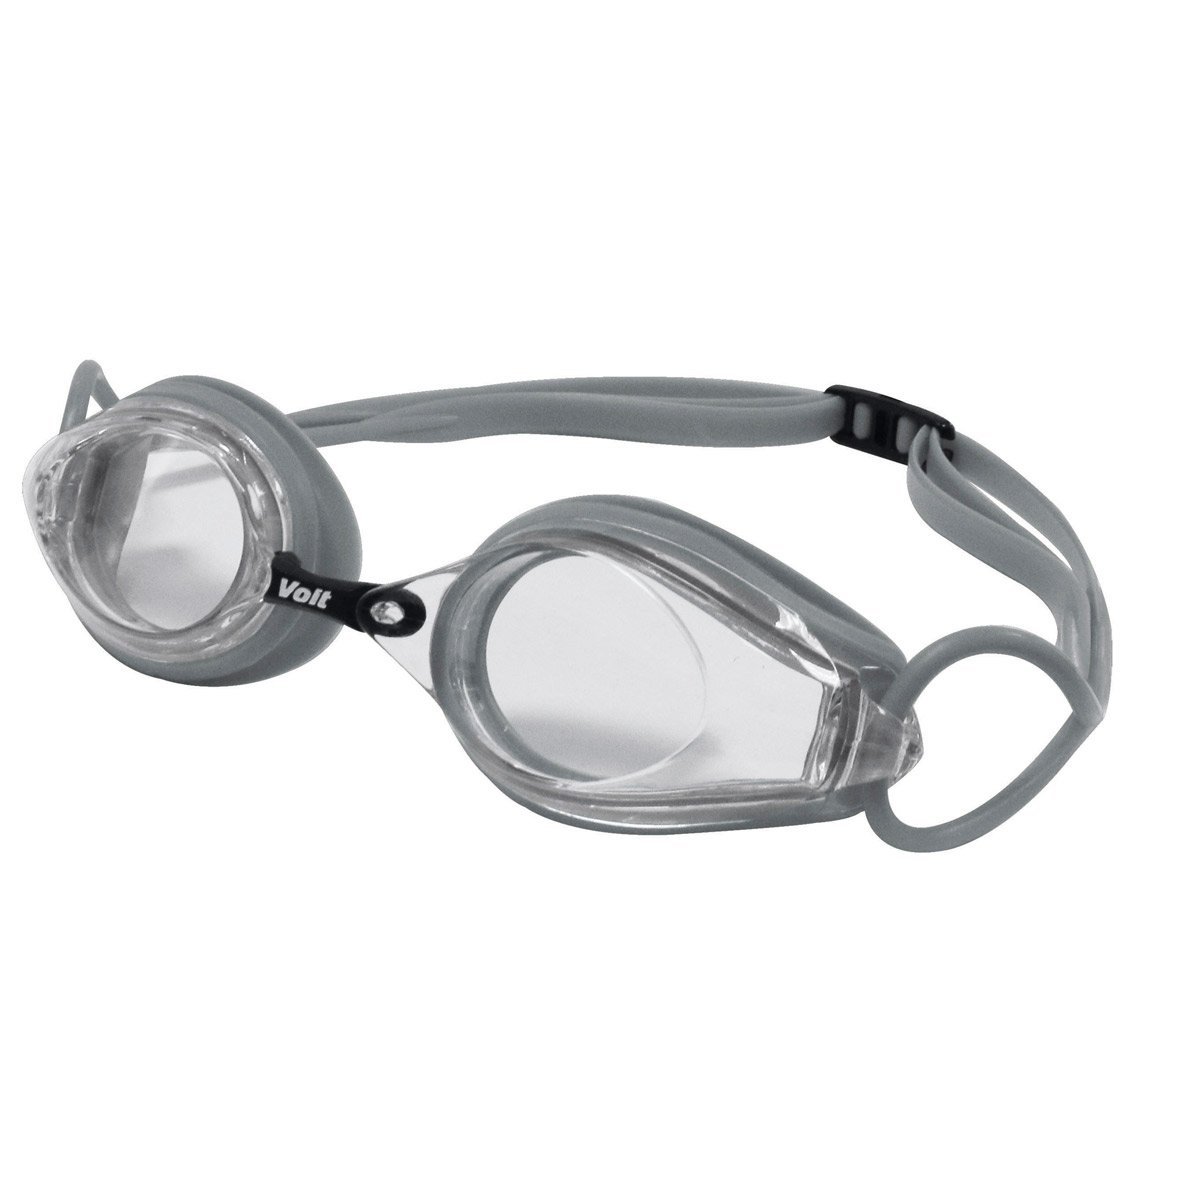 Goggle Twister Voit